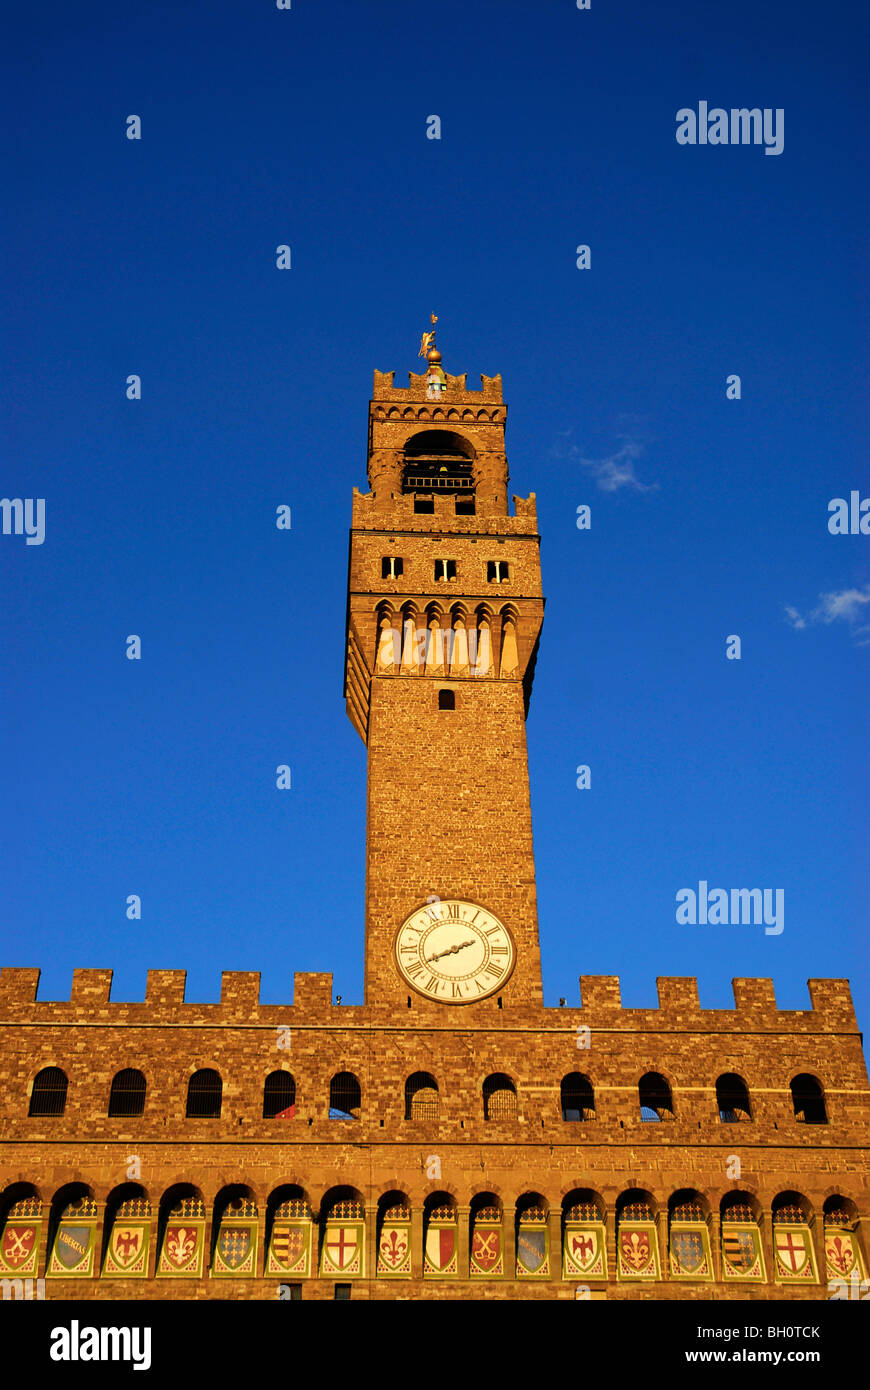 Palazzo Vecchio, tower with clock and emblems under blue sky, Florence, Tuscany, Italy, Europe Stock Photo